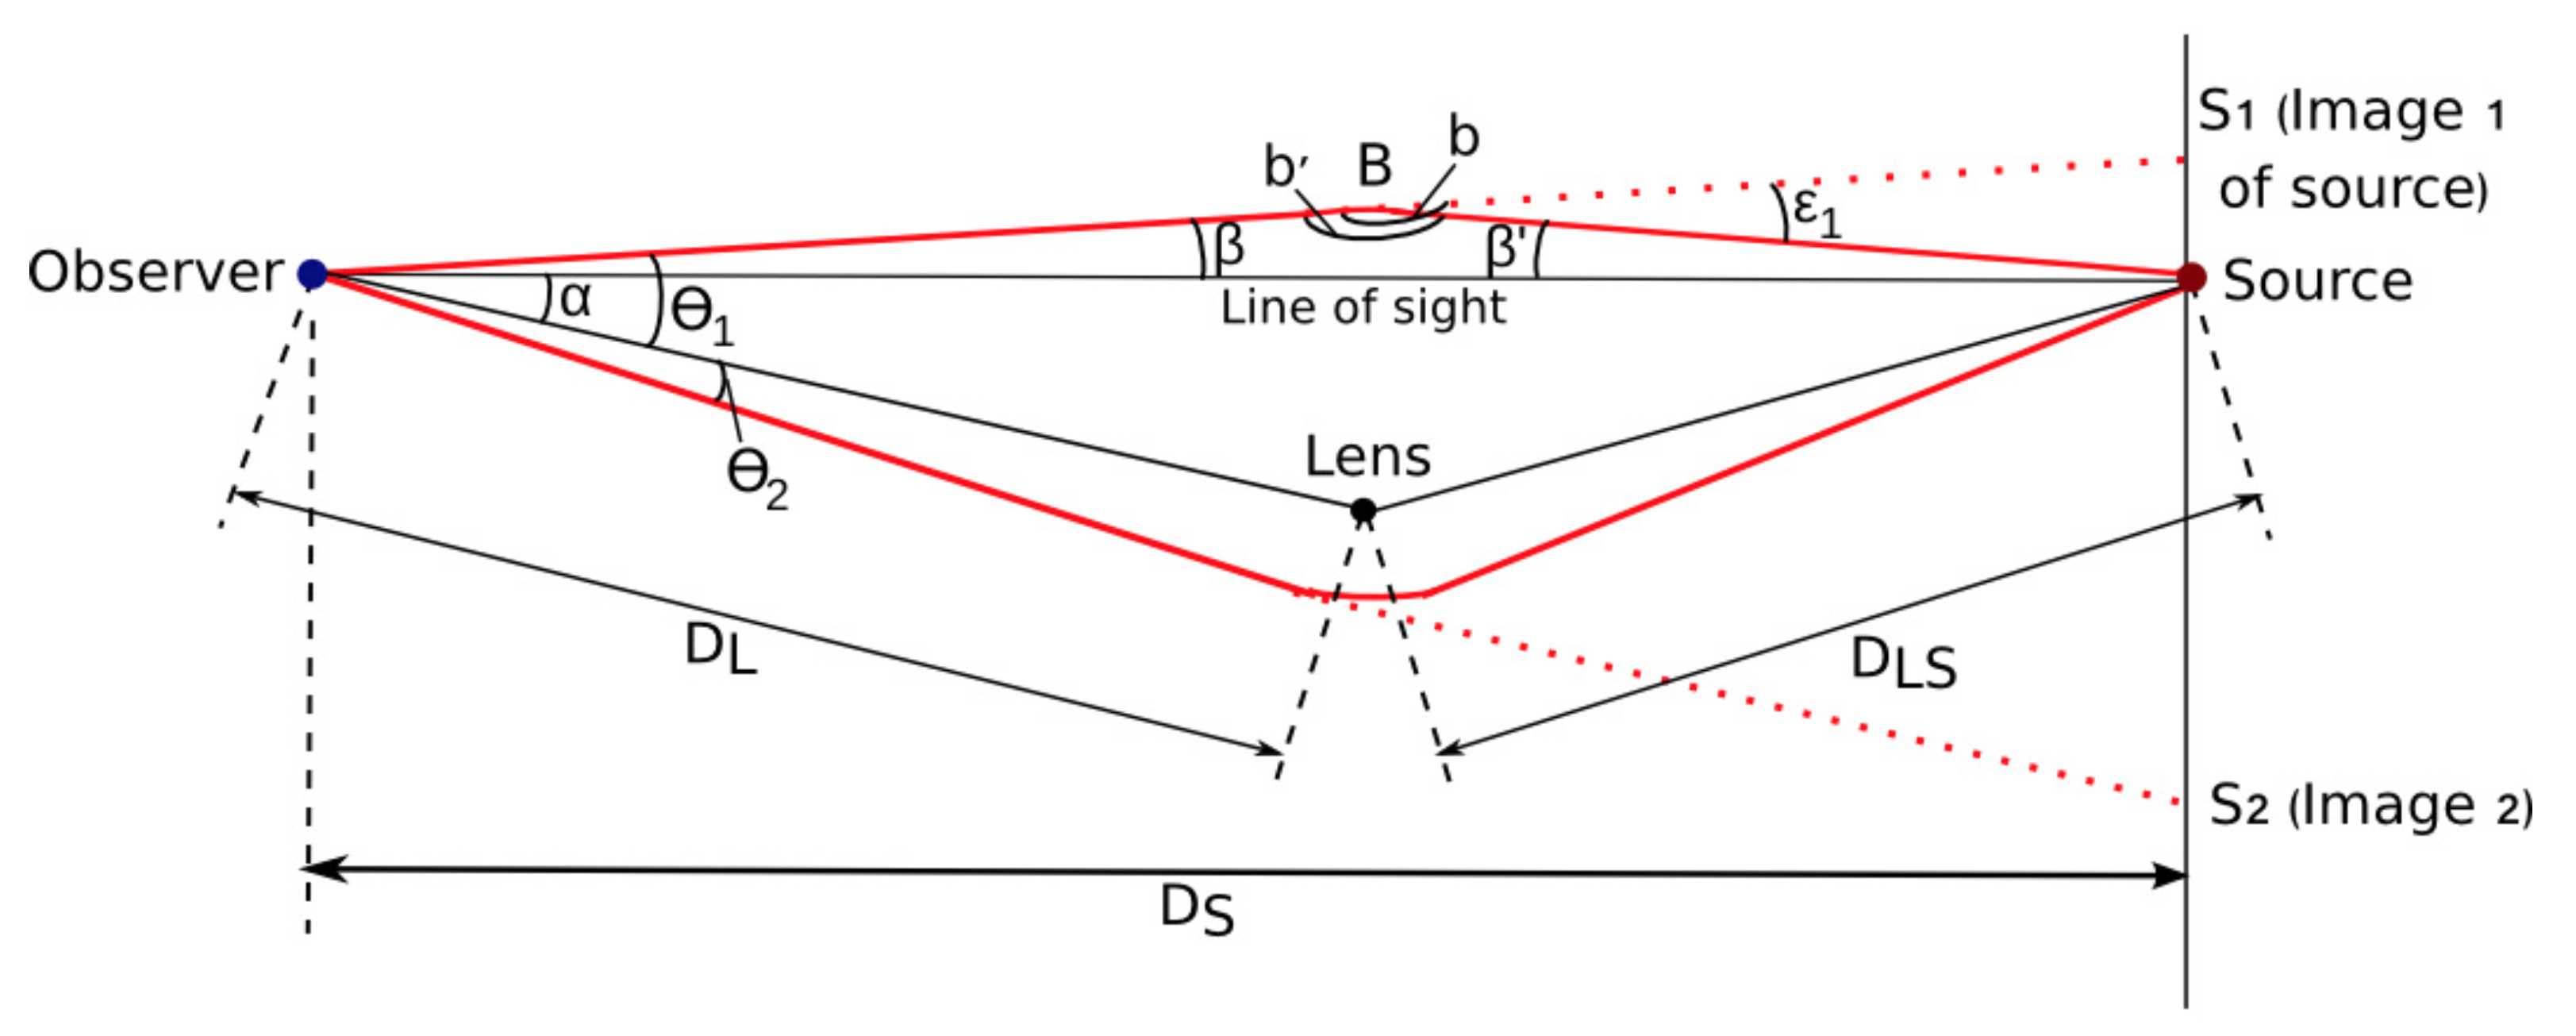 Geometry of a microlensing event